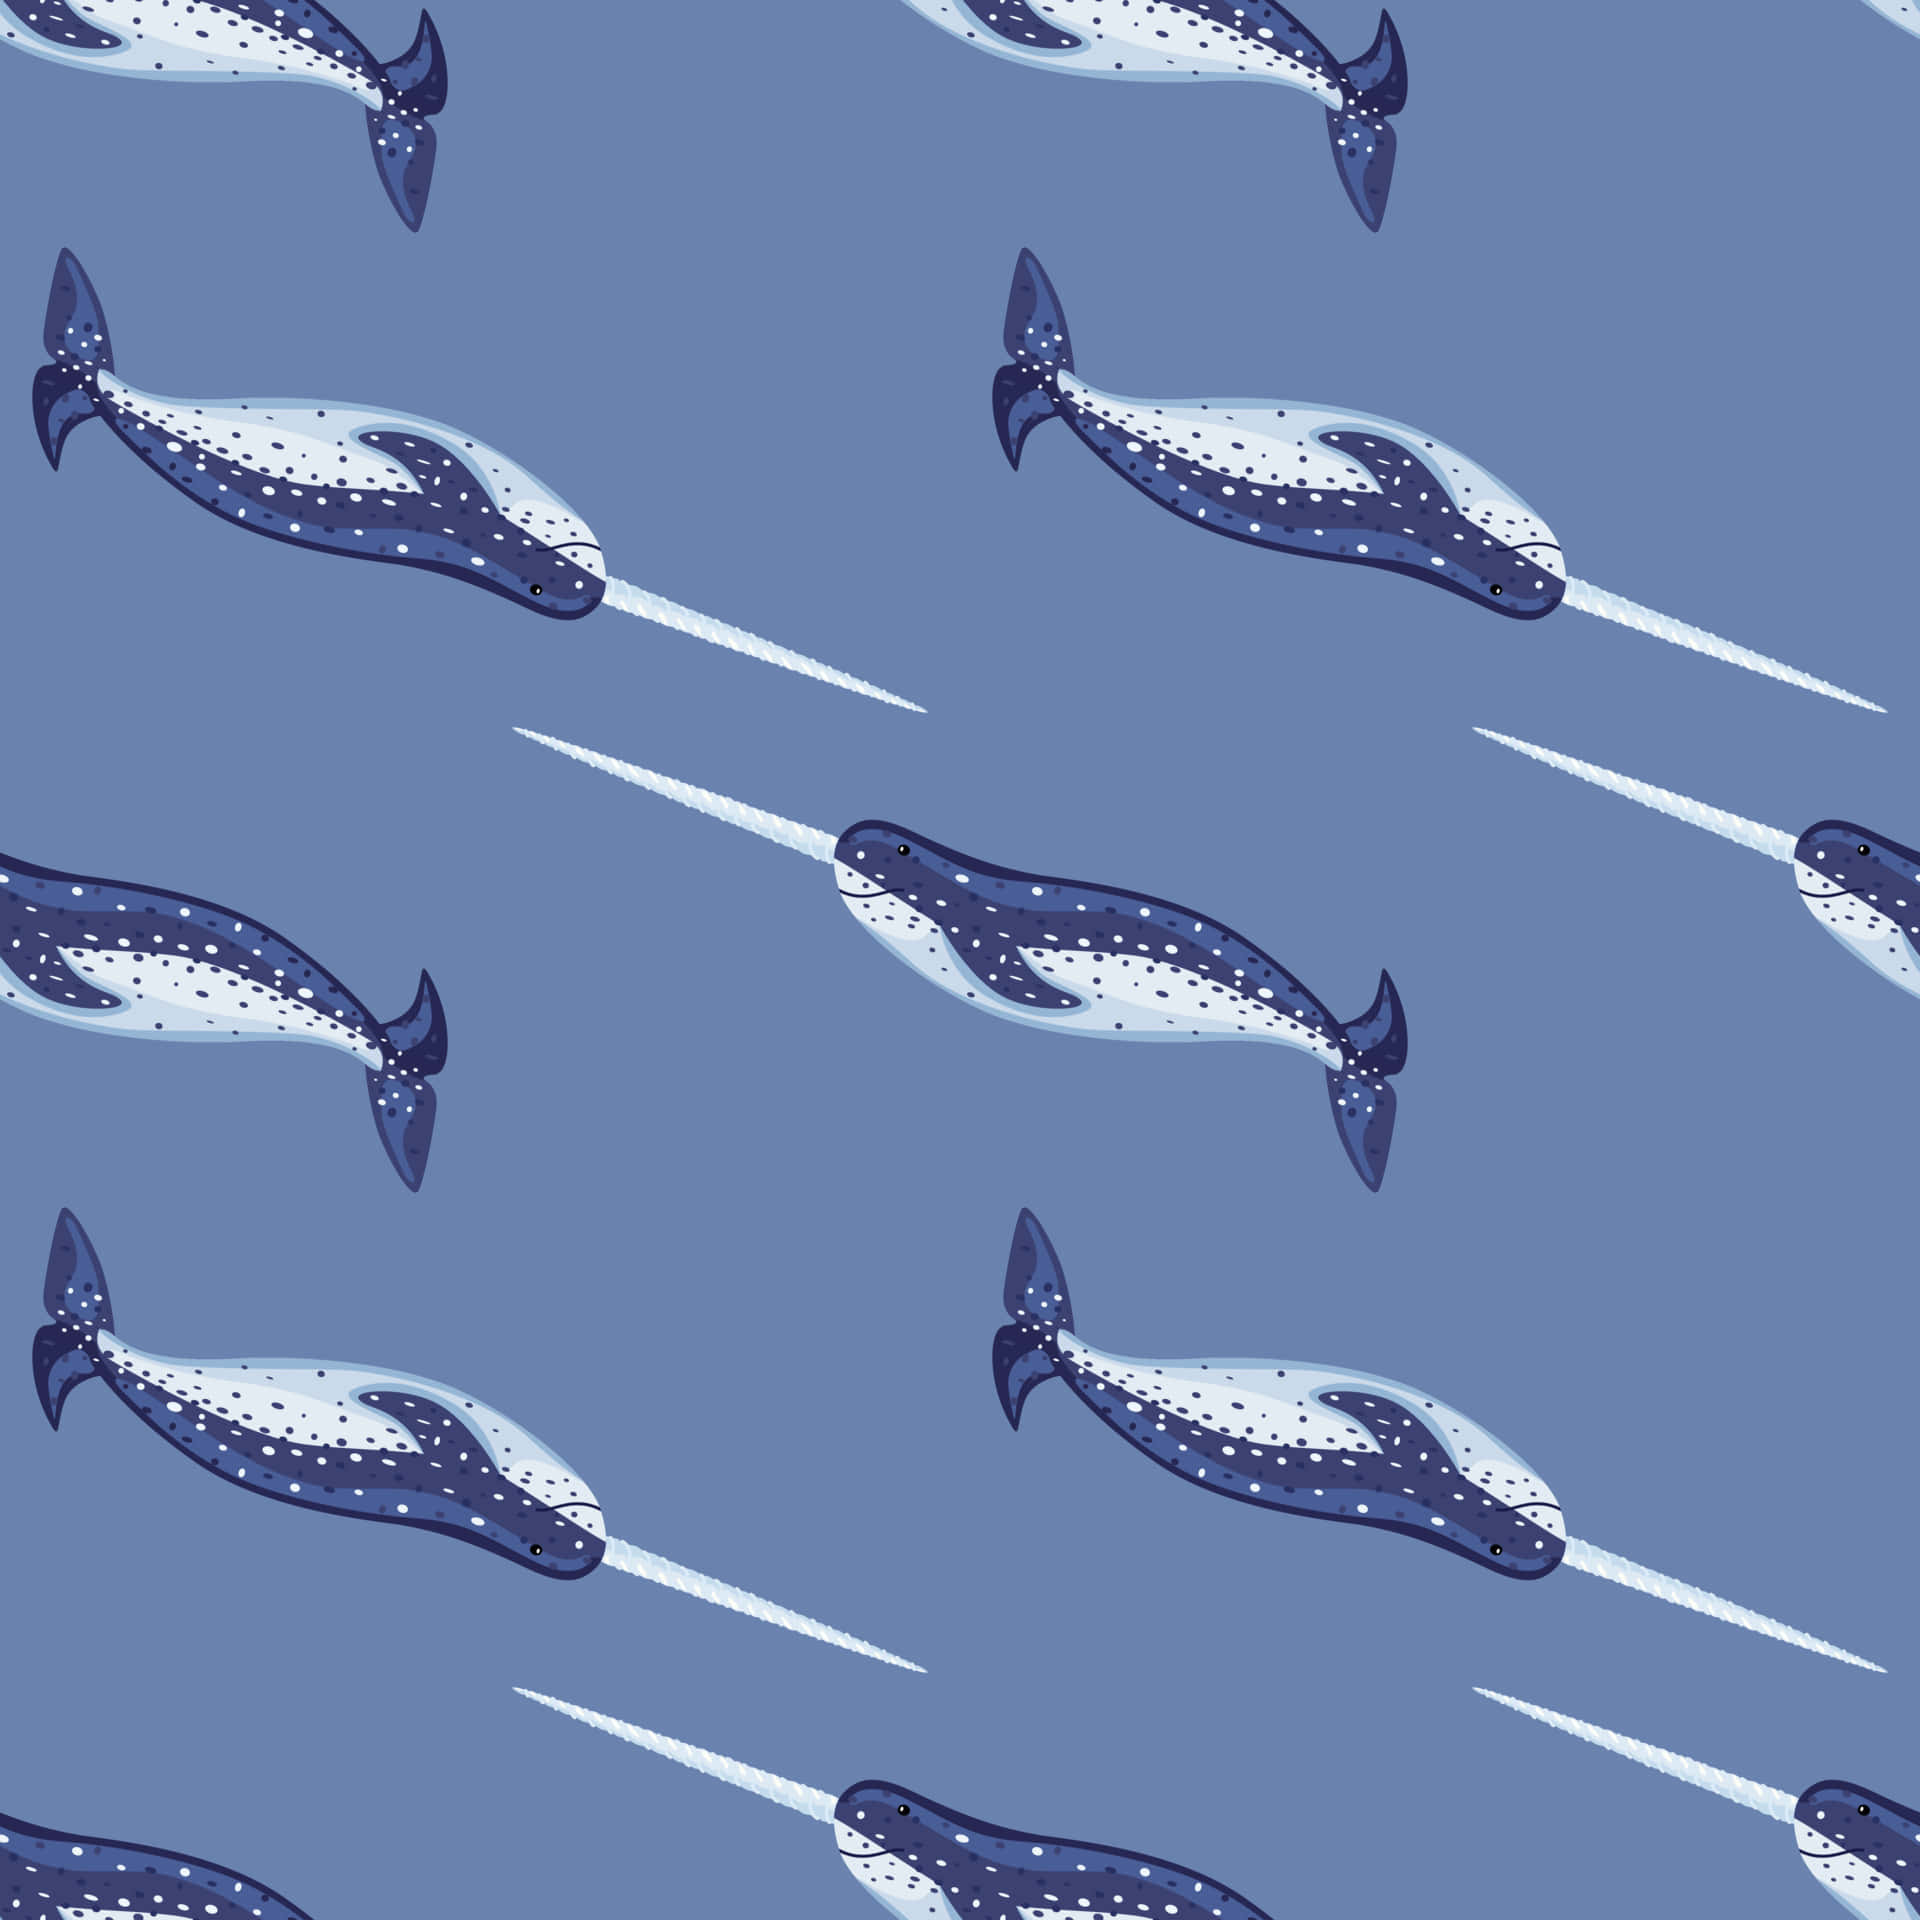 Up Close With a Majestic Narwhal